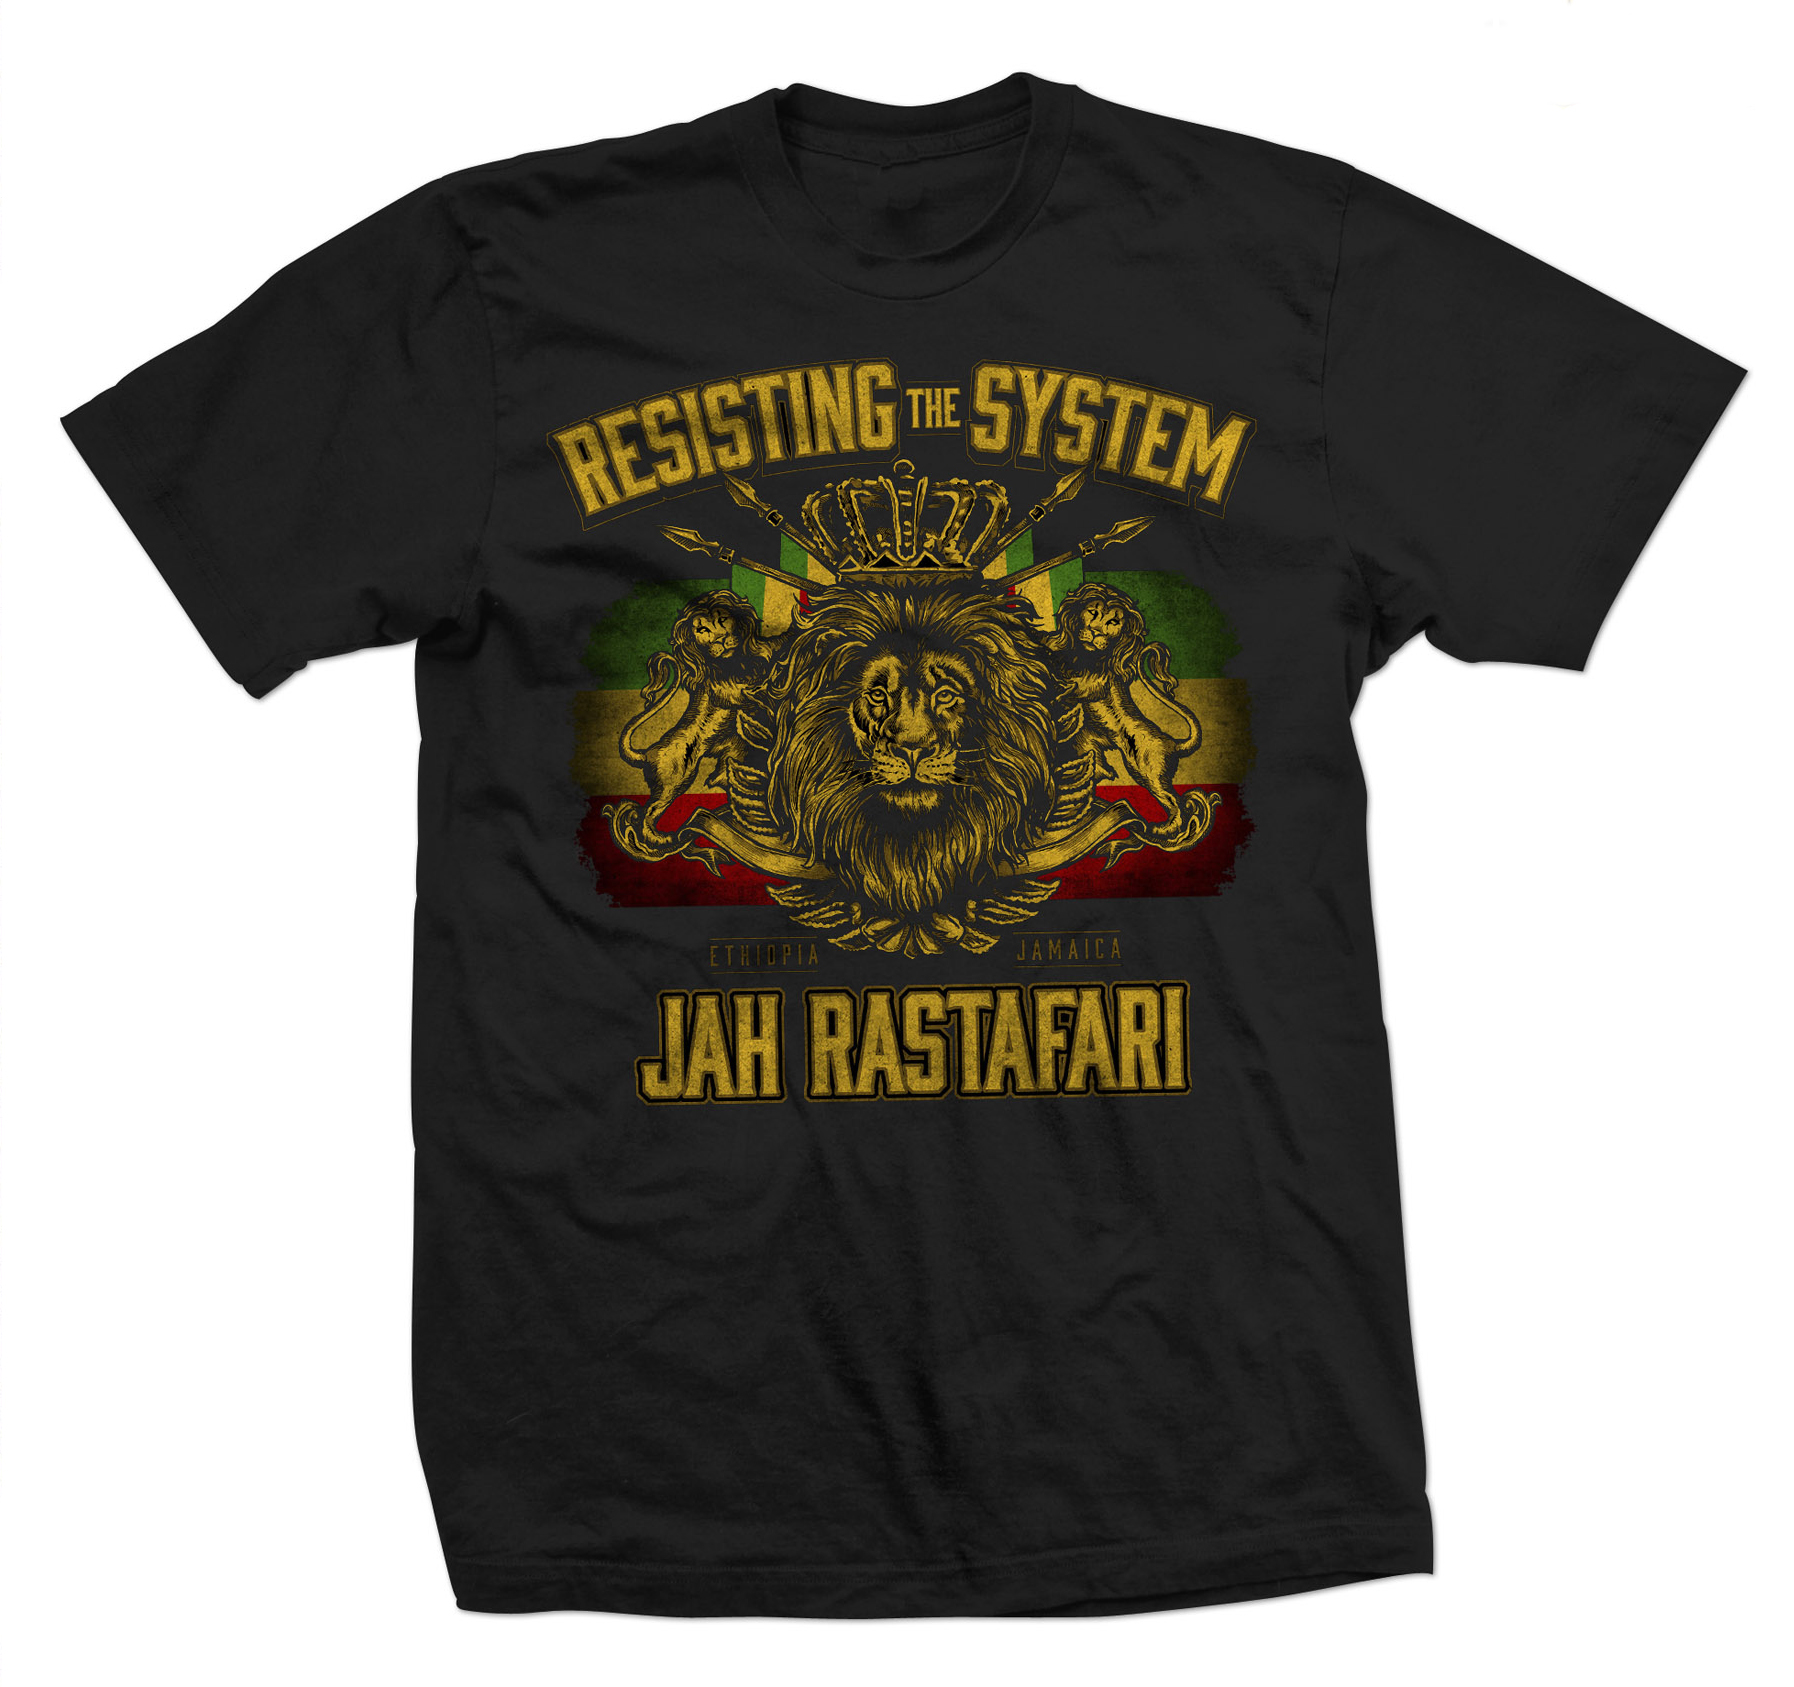 Resisting the system T-Shirt